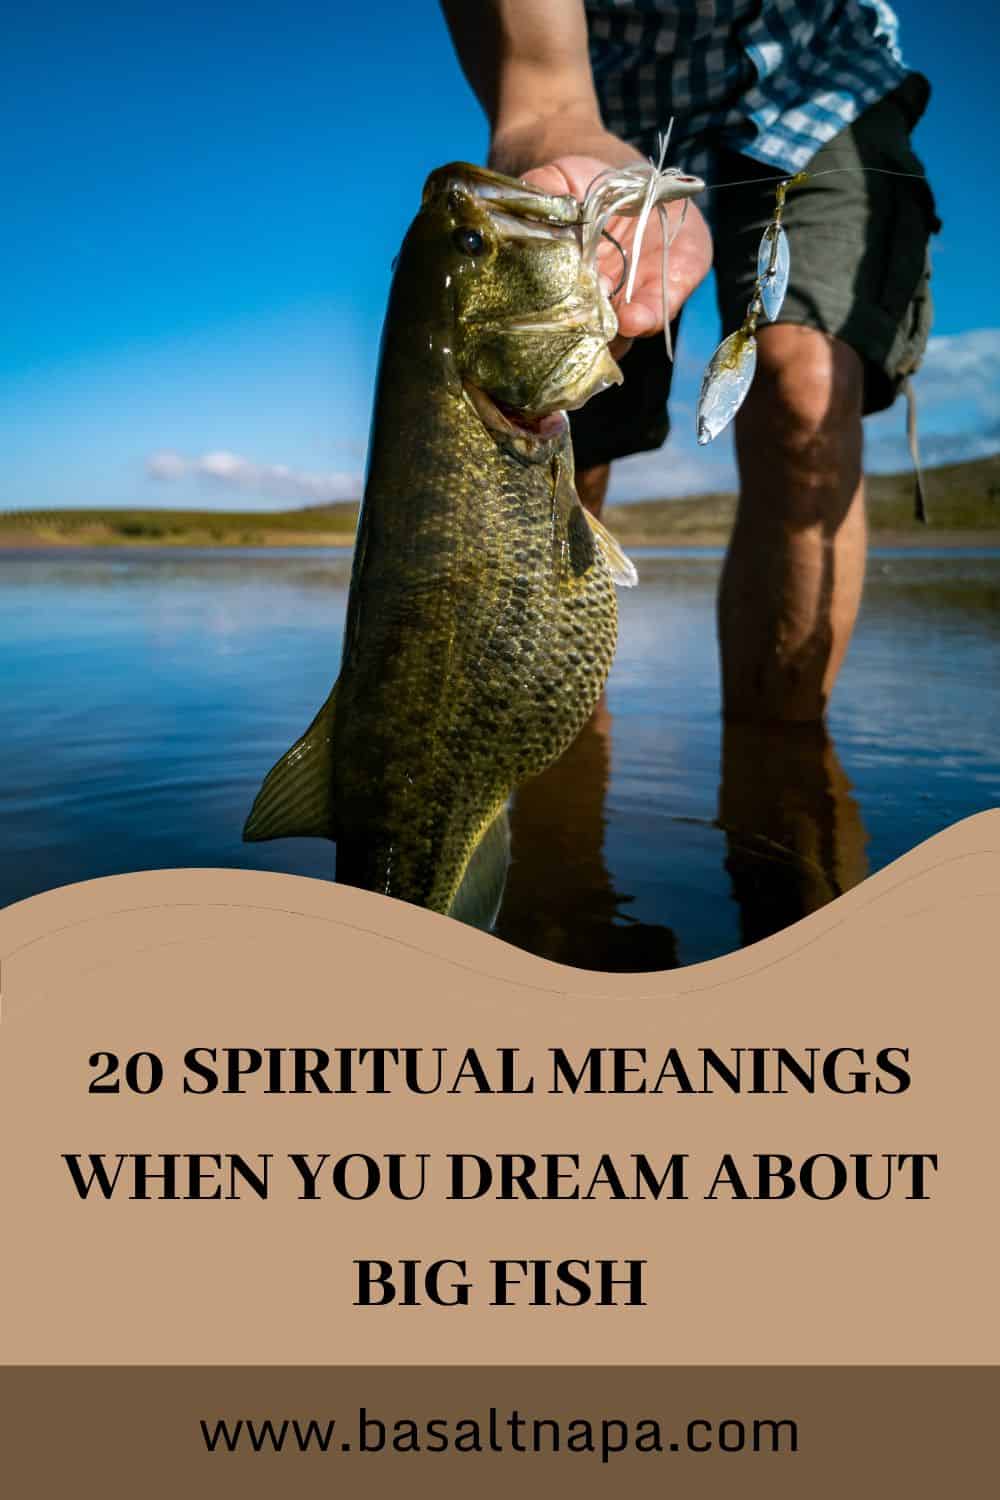 20 Spiritual Meanings When You Dream About Big Fish